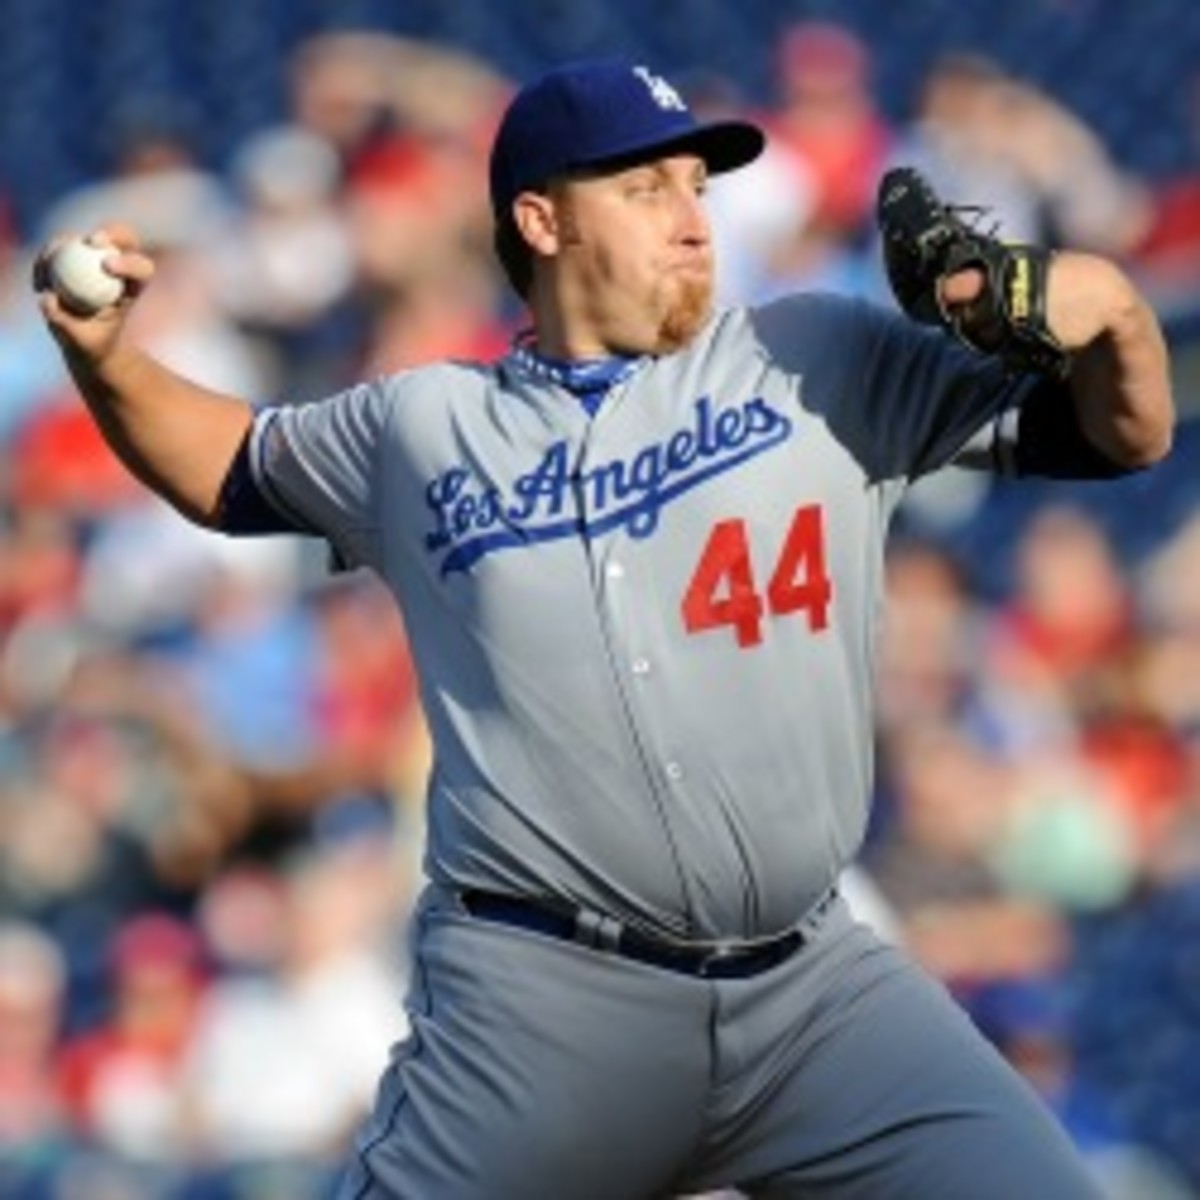 Pitcher Aaron Harang lost his spot in the Dodgers' rotation when they acquired three pitchers this offseason. (G Fiume/Getty Images)